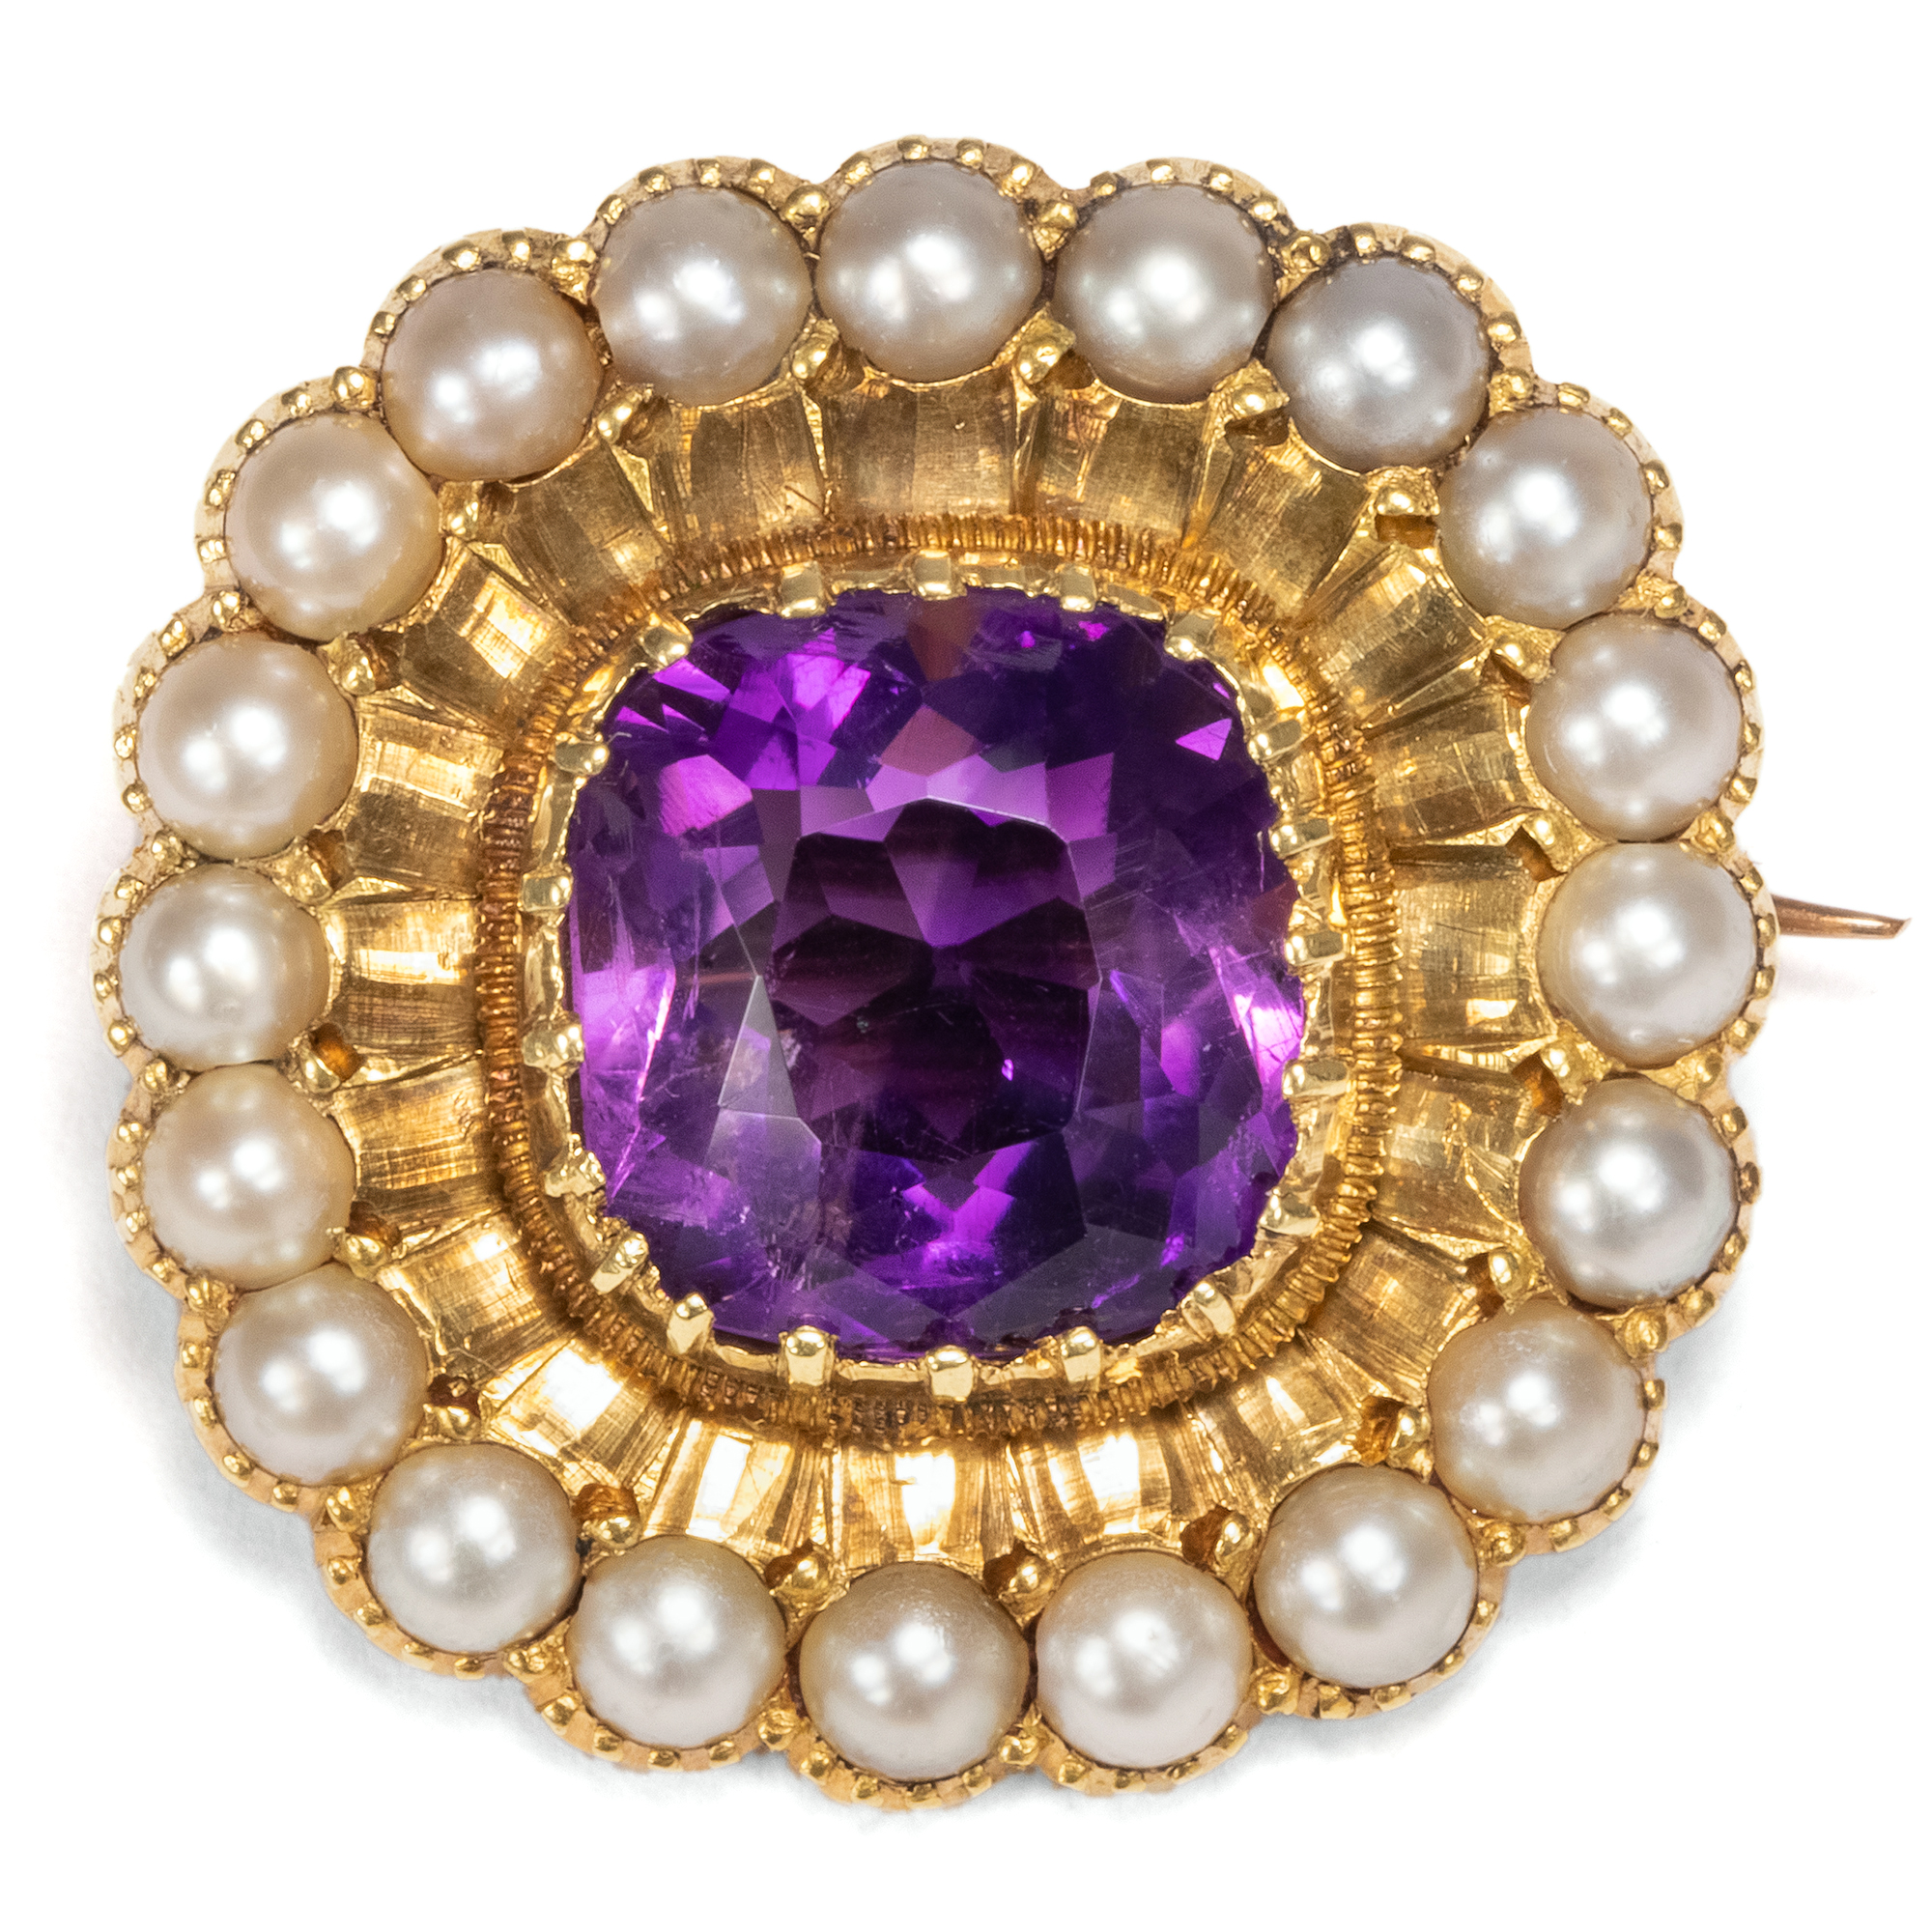 Antique Gold Brooch with Amethyst & Natural Pearls, Great Britain c. 1820